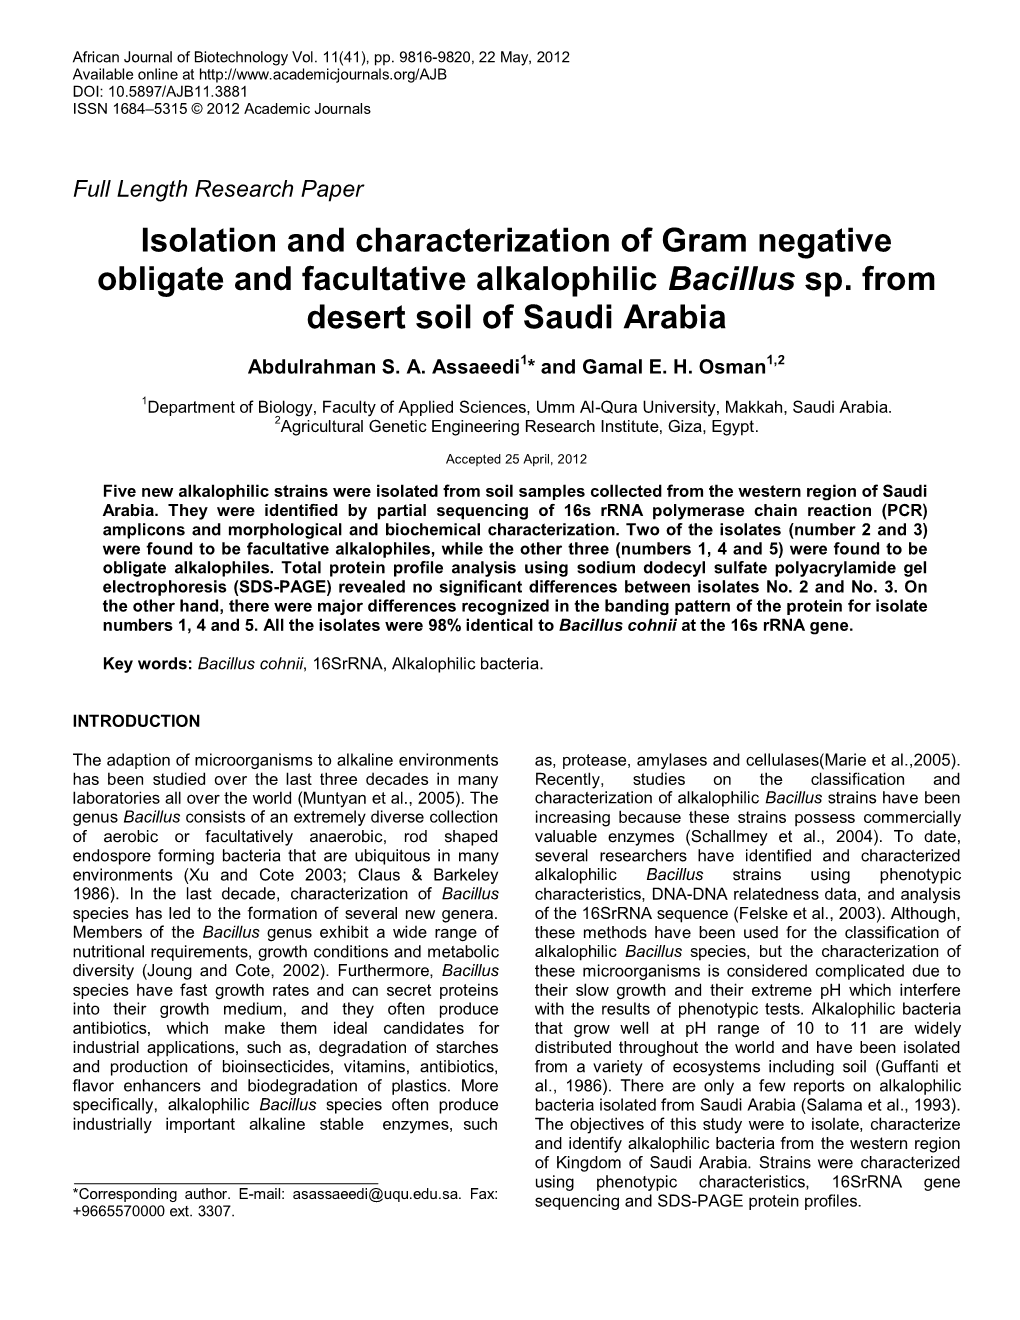 Isolation and Characterization of Gram Negative Obligate and Facultative Alkalophilic Bacillus Sp